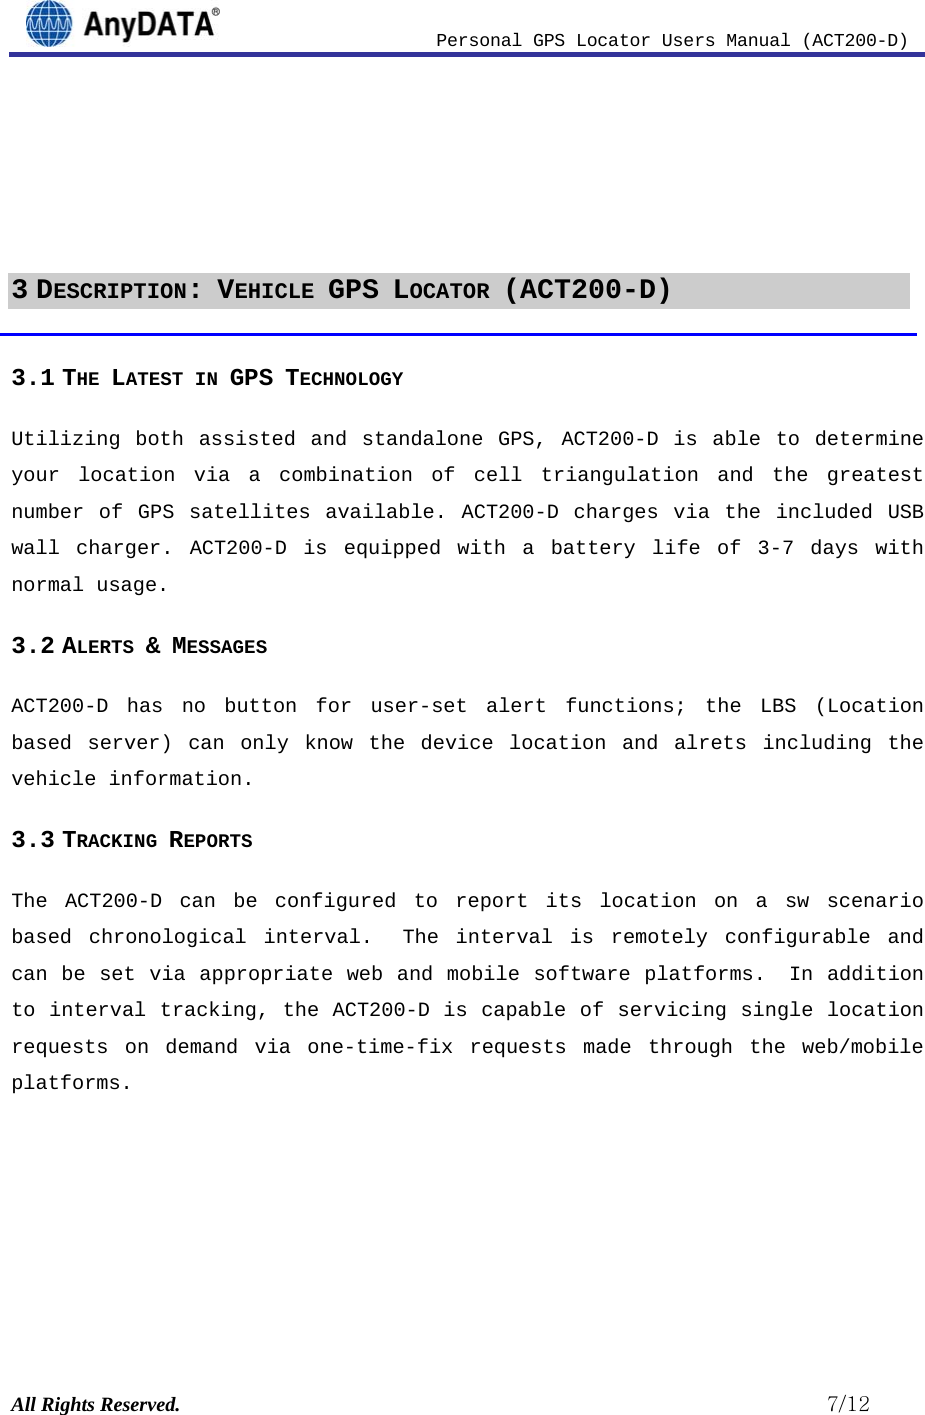                          Personal GPS Locator Users Manual (ACT200-D) All Rights Reserved.                                                          7/12     3 DESCRIPTION: VEHICLE GPS LOCATOR (ACT200-D) 3.1 THE LATEST IN GPS TECHNOLOGY Utilizing both assisted and standalone GPS, ACT200-D is able to determine your location via a combination of cell triangulation and the greatest number of GPS satellites available. ACT200-D charges via the included USB wall charger. ACT200-D is equipped with a battery life of 3-7 days with normal usage.  3.2 ALERTS &amp; MESSAGES  ACT200-D has no button for user-set alert functions; the LBS (Location based server) can only know the device location and alrets including the vehicle information. 3.3 TRACKING REPORTS The ACT200-D can be configured to report its location on a sw scenario based chronological interval.  The interval is remotely configurable and can be set via appropriate web and mobile software platforms.  In addition to interval tracking, the ACT200-D is capable of servicing single location requests on demand via one-time-fix requests made through the web/mobile platforms. 